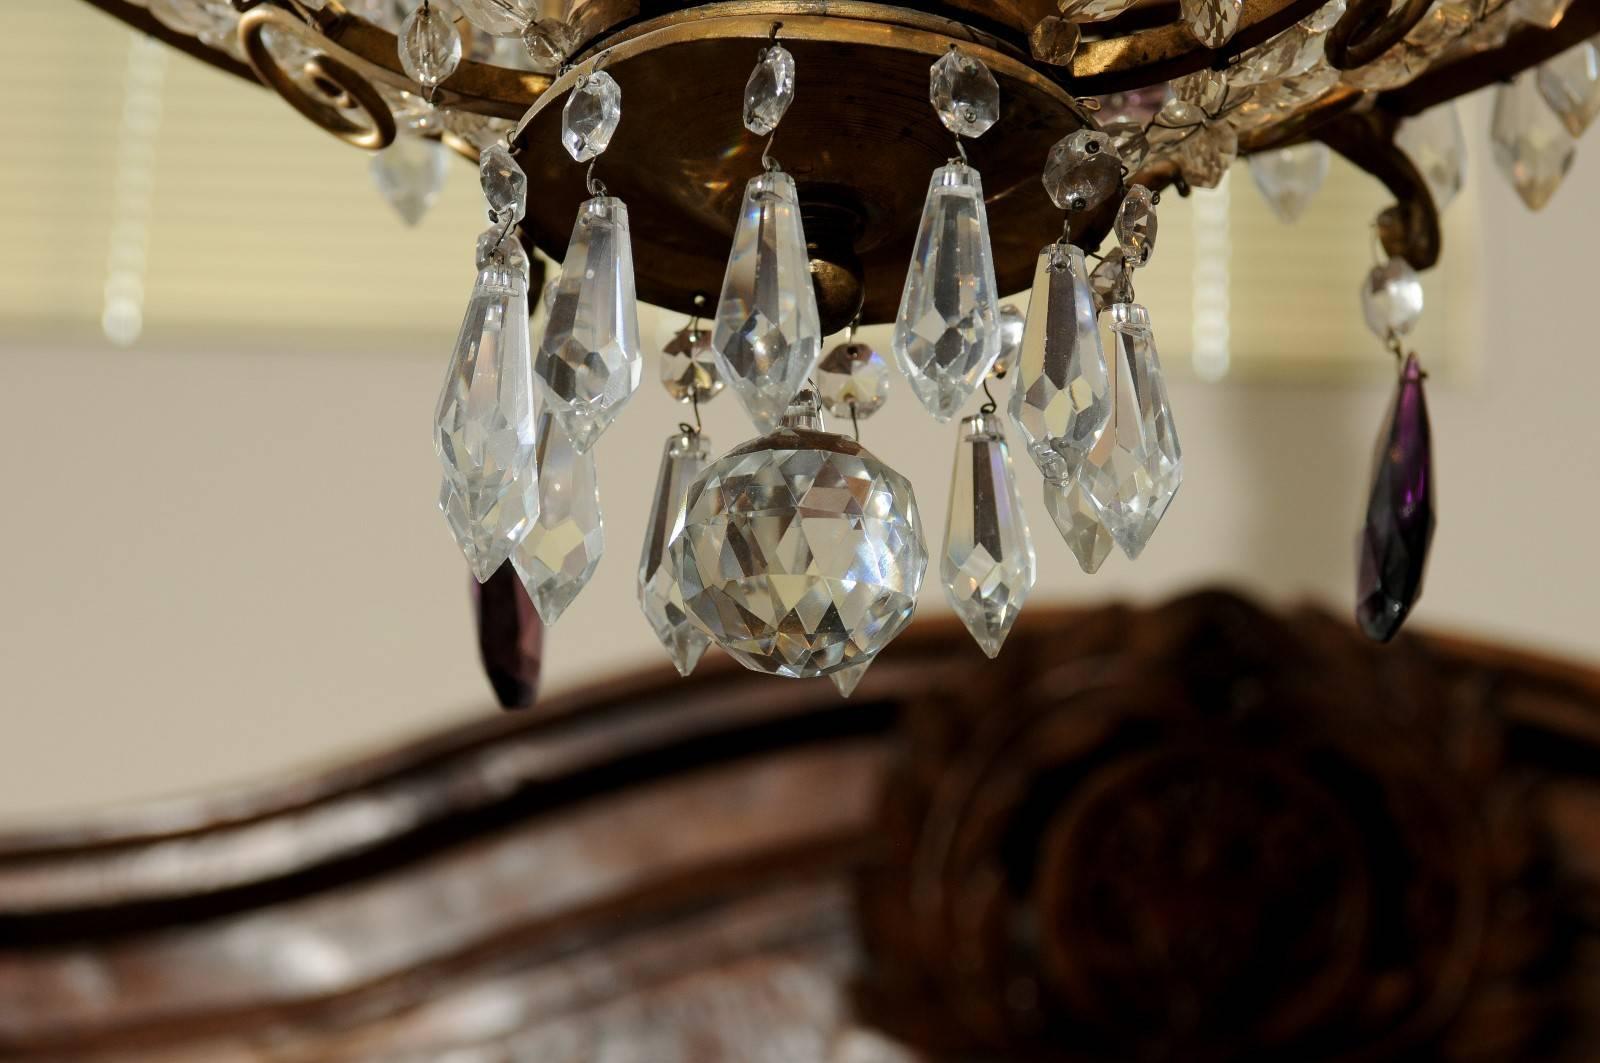 Bronze Frame Chandelier with Clear and Amethyst Colored Prisms, circa 1890-1920 For Sale 5